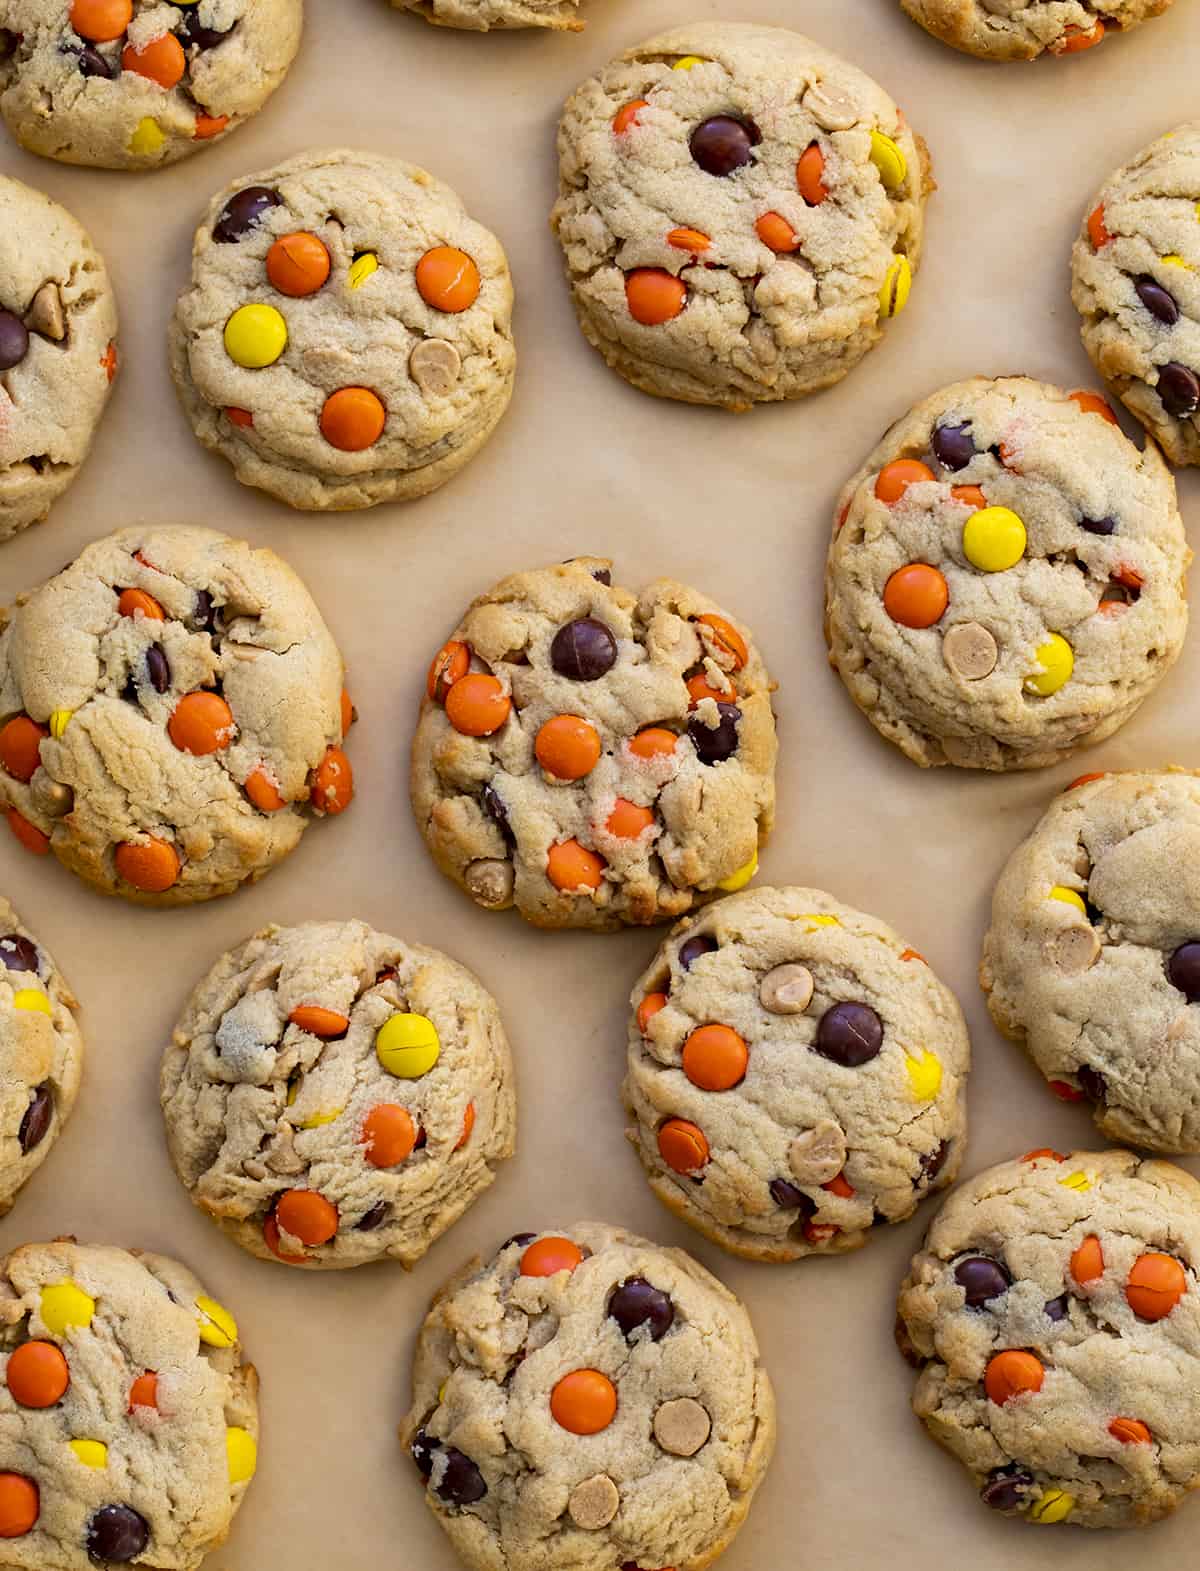 Reese's Pieces Peanut Butter Cookies from Overhead on Parchment Paper.